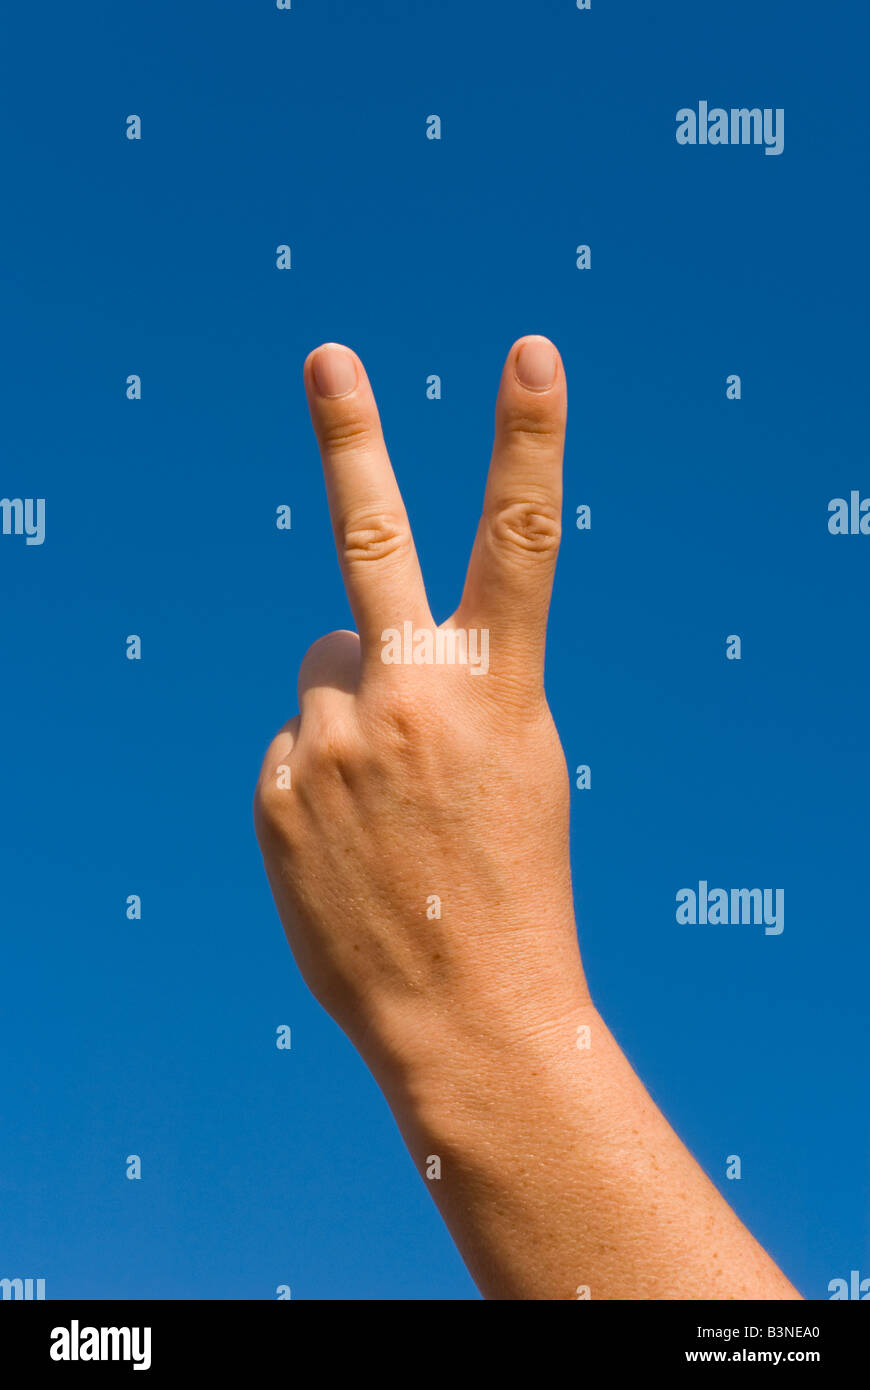 Model Released Detail of female forming an abusive V sign Stock Photo